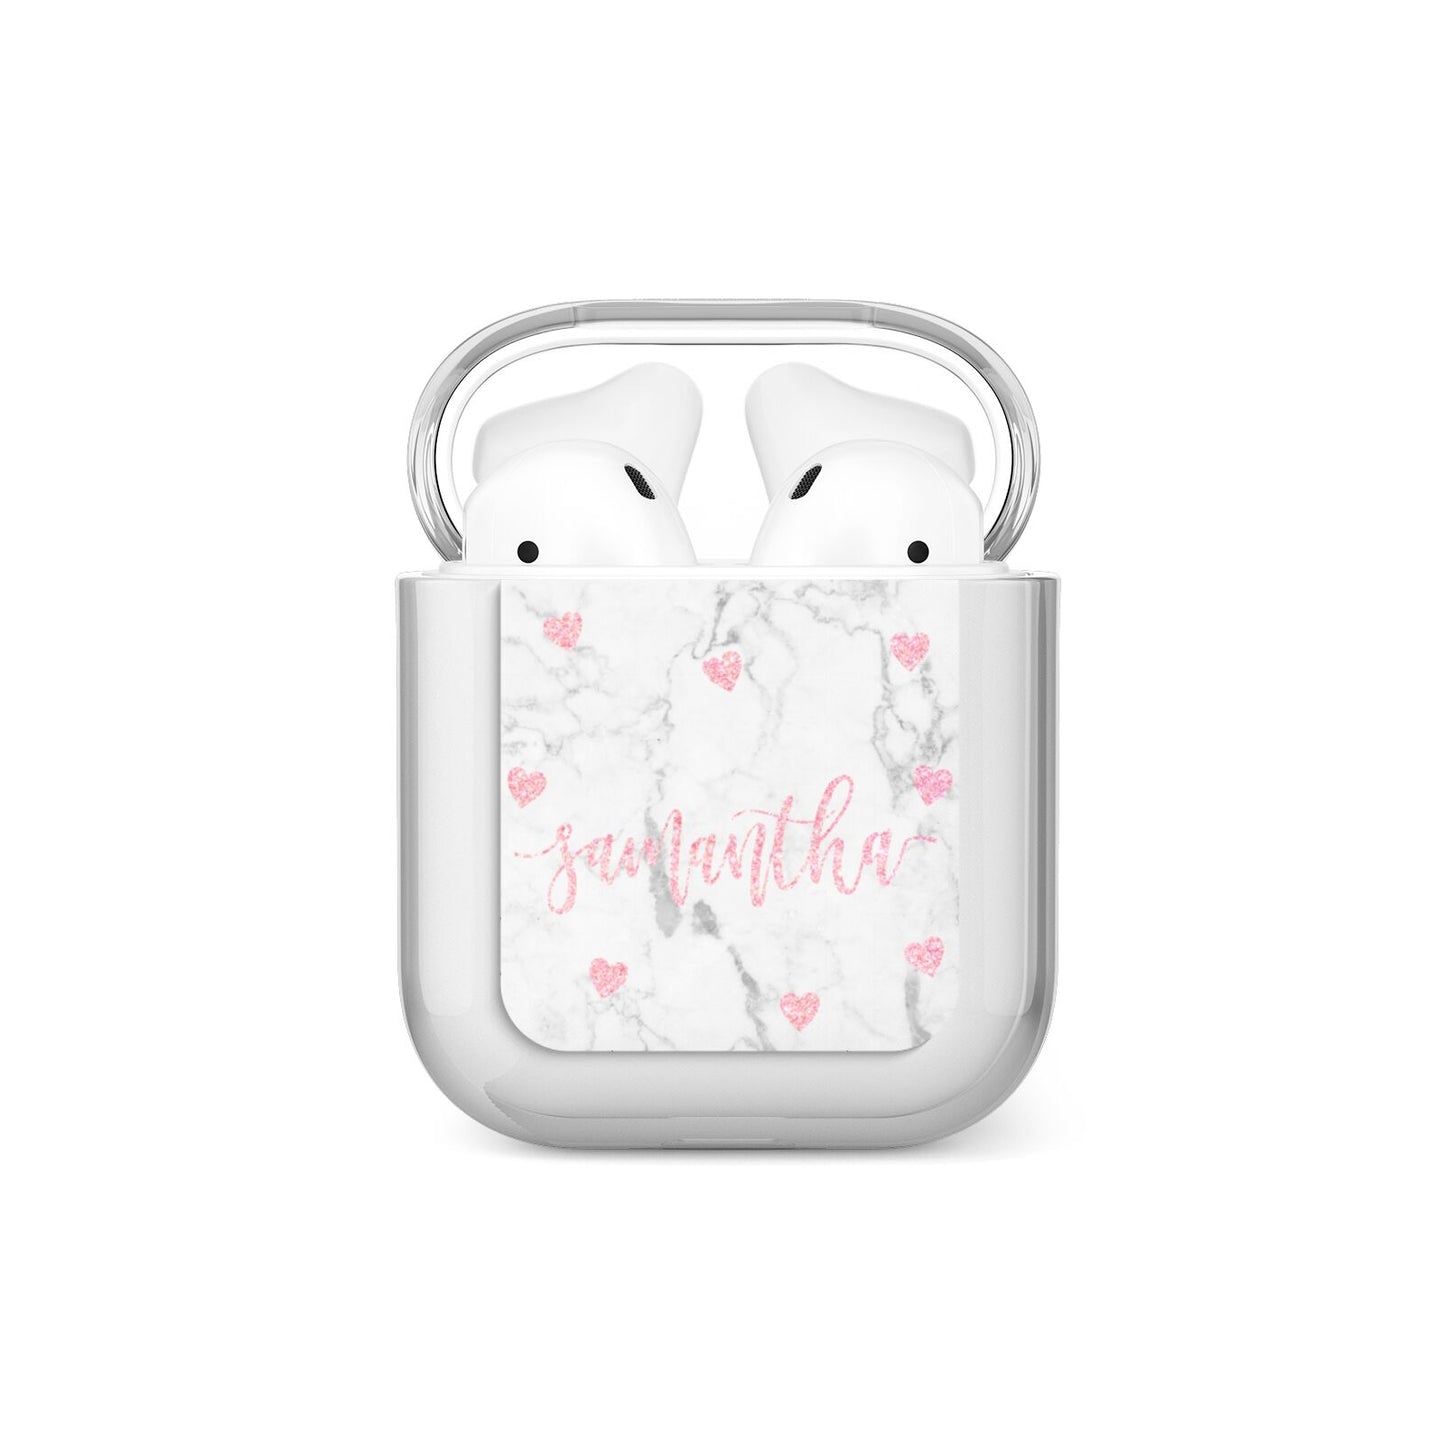 Glitter Hearts Marble Personalised Name AirPods Case